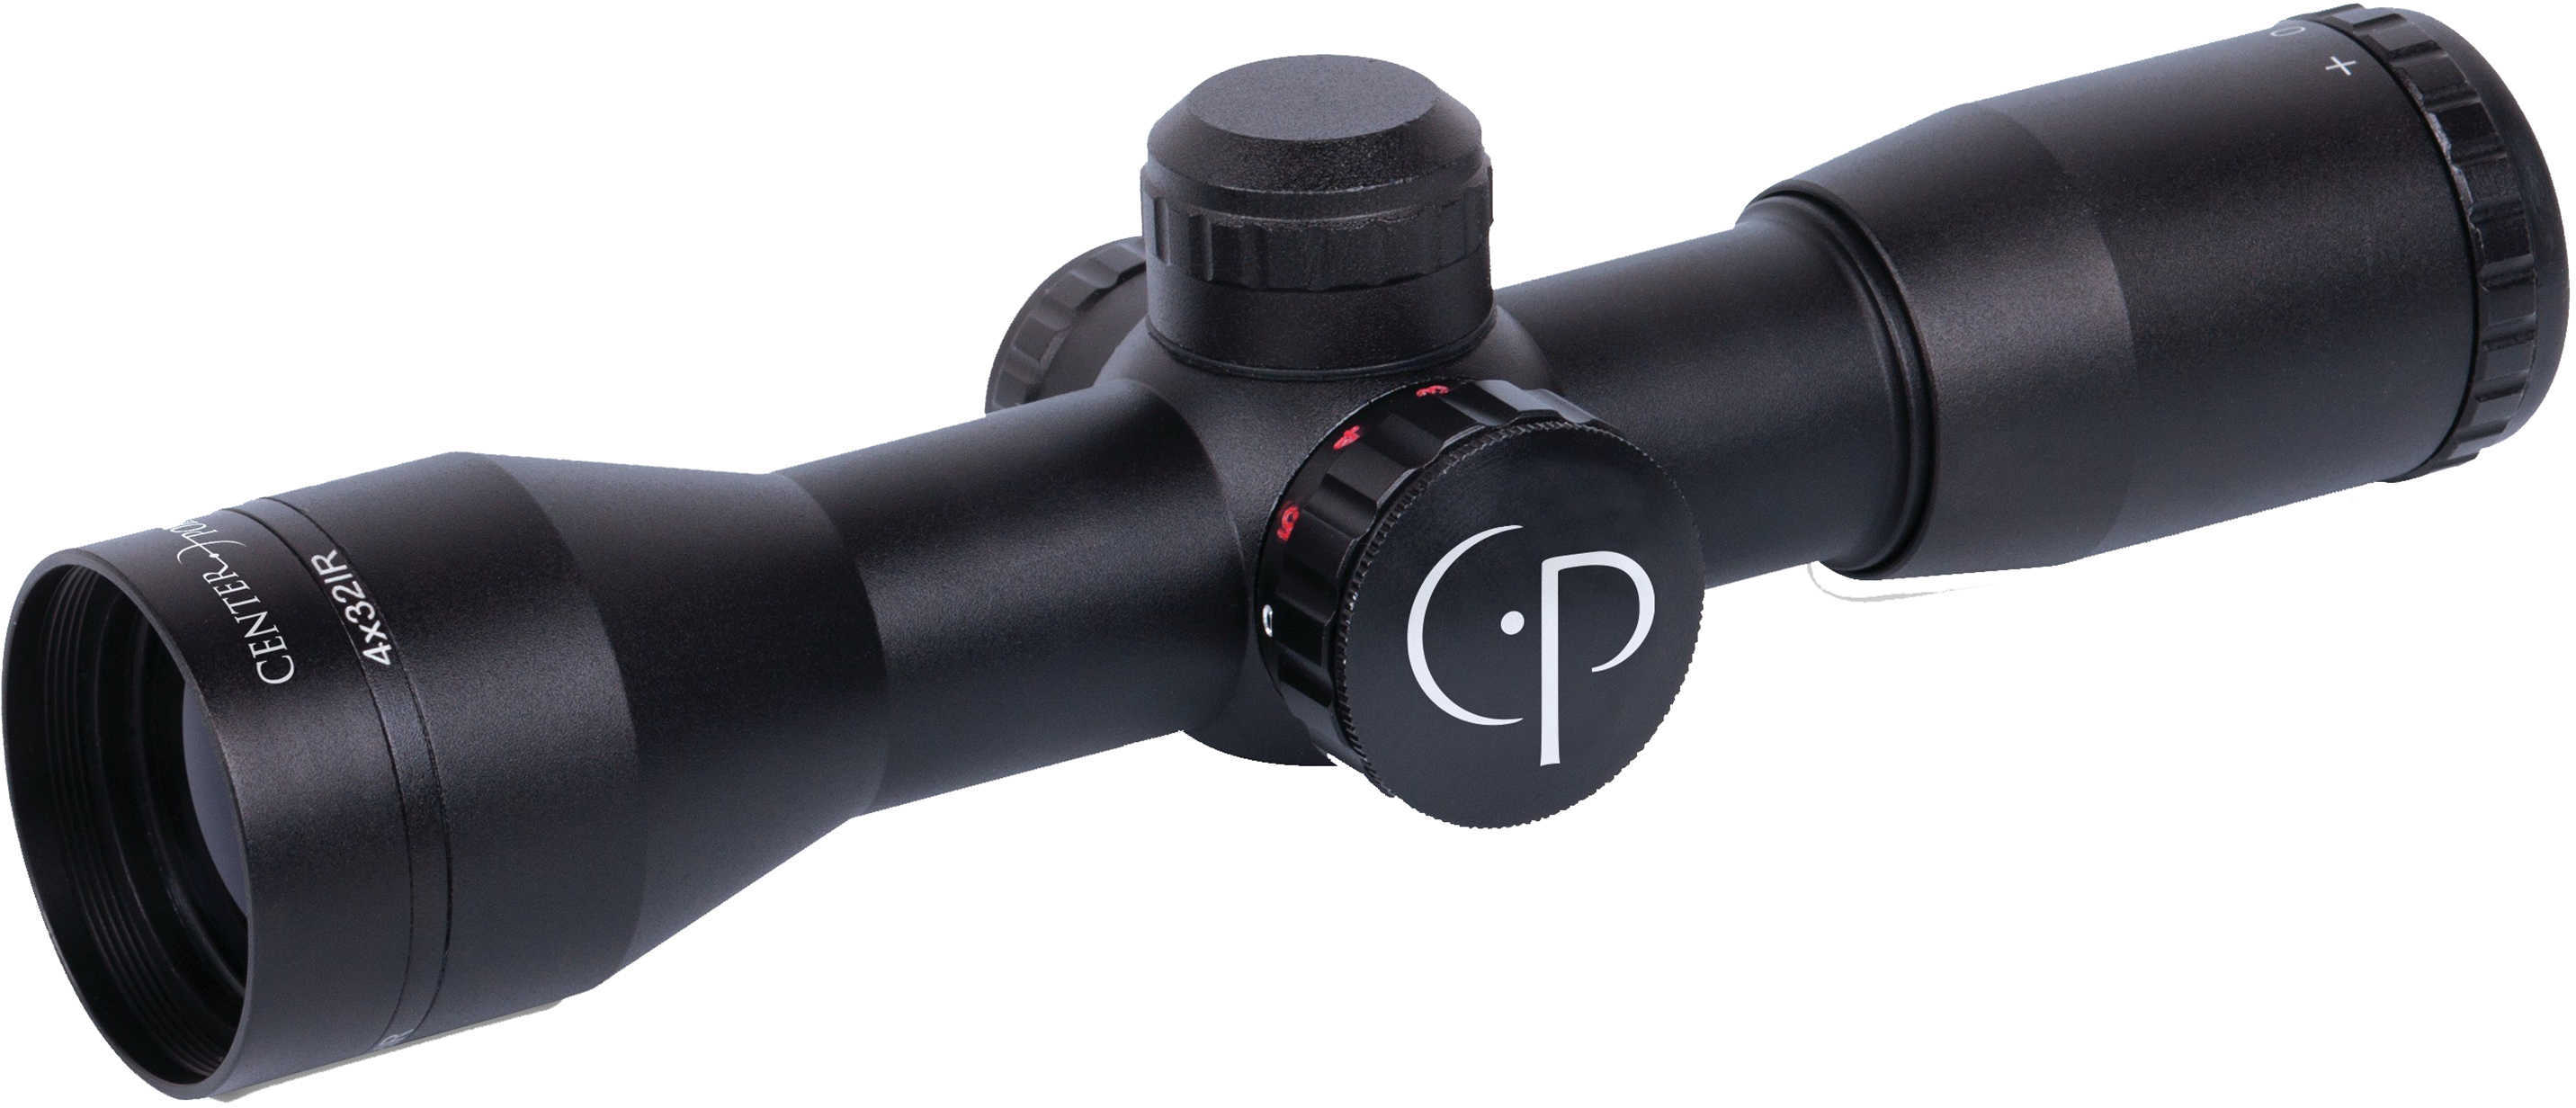 CenterPoint 4x32mm Crossbow Scope, Black Md: LC432ERG2